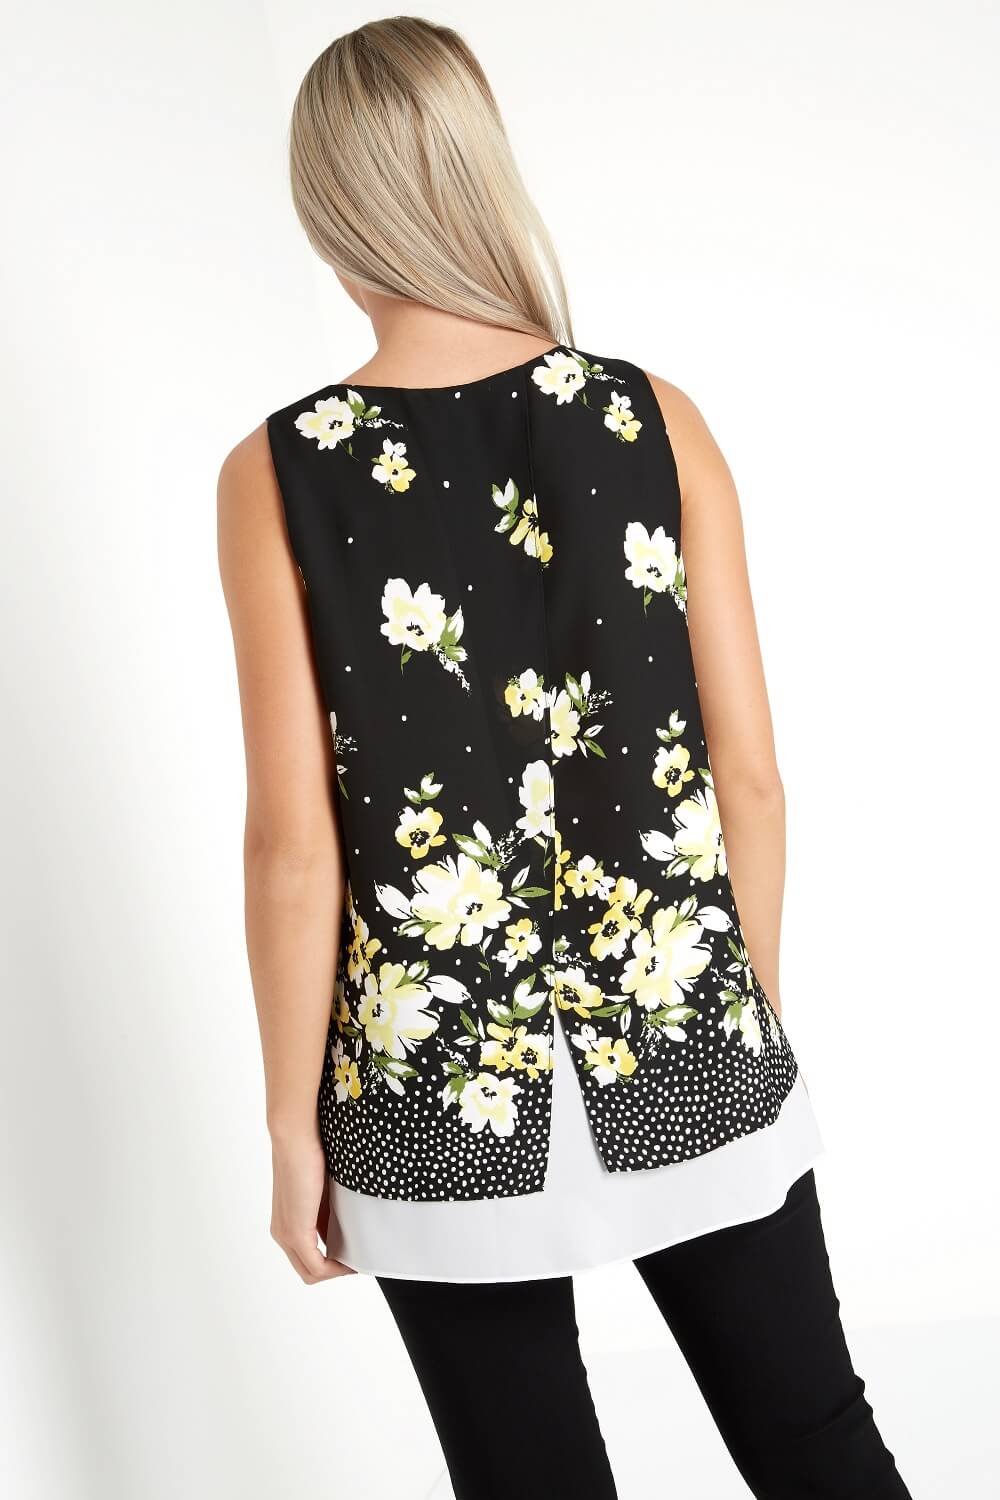 Black Floral Print Overlay Top, Image 3 of 8